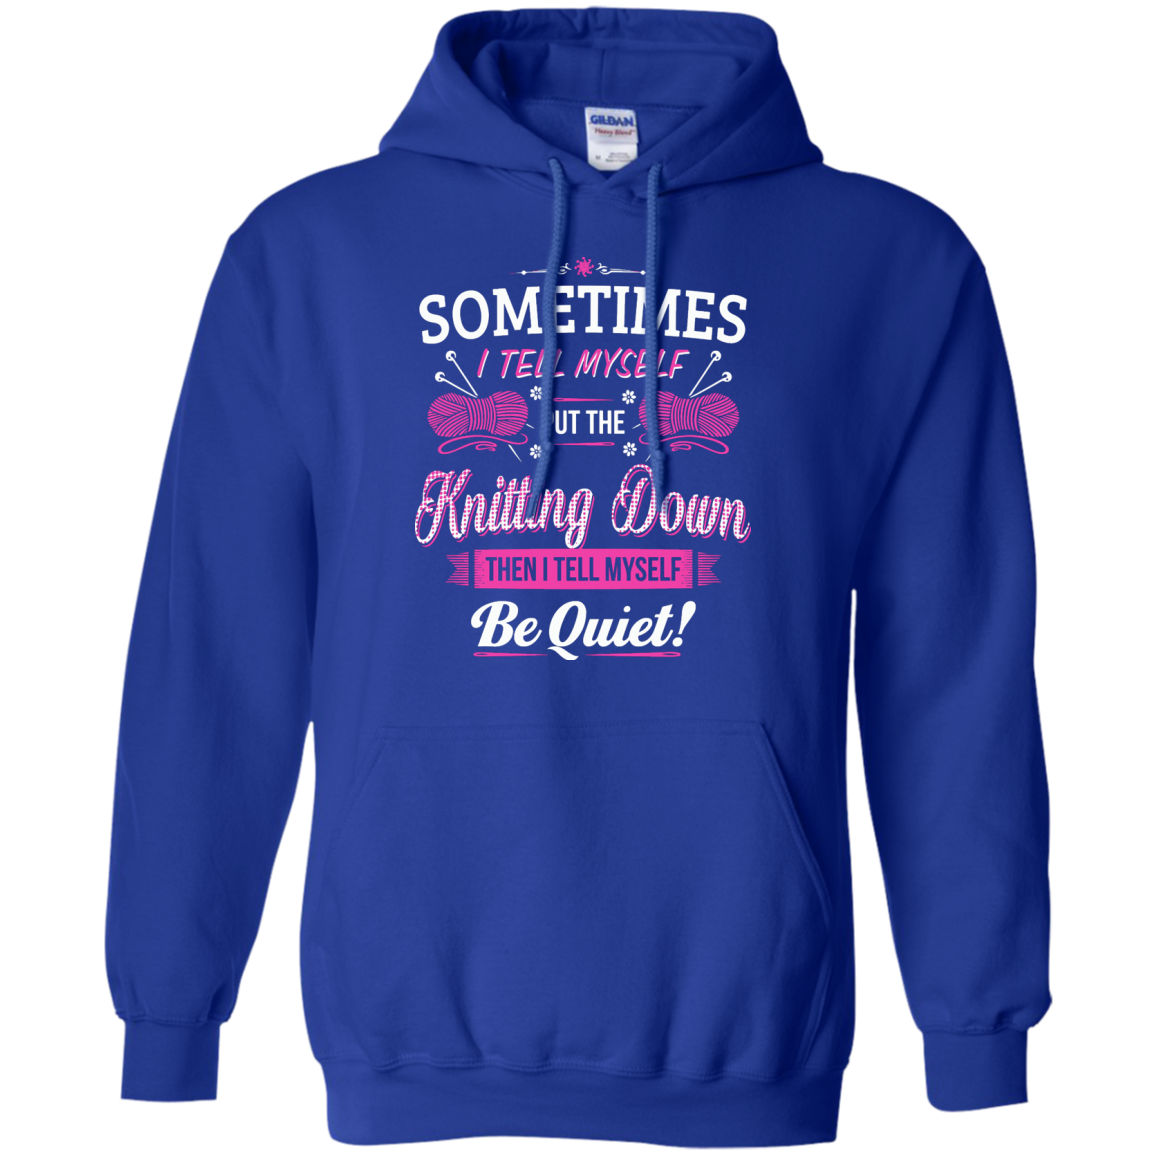 Put the Knitting Down Pullover Hoodies - Crafter4Life - 10